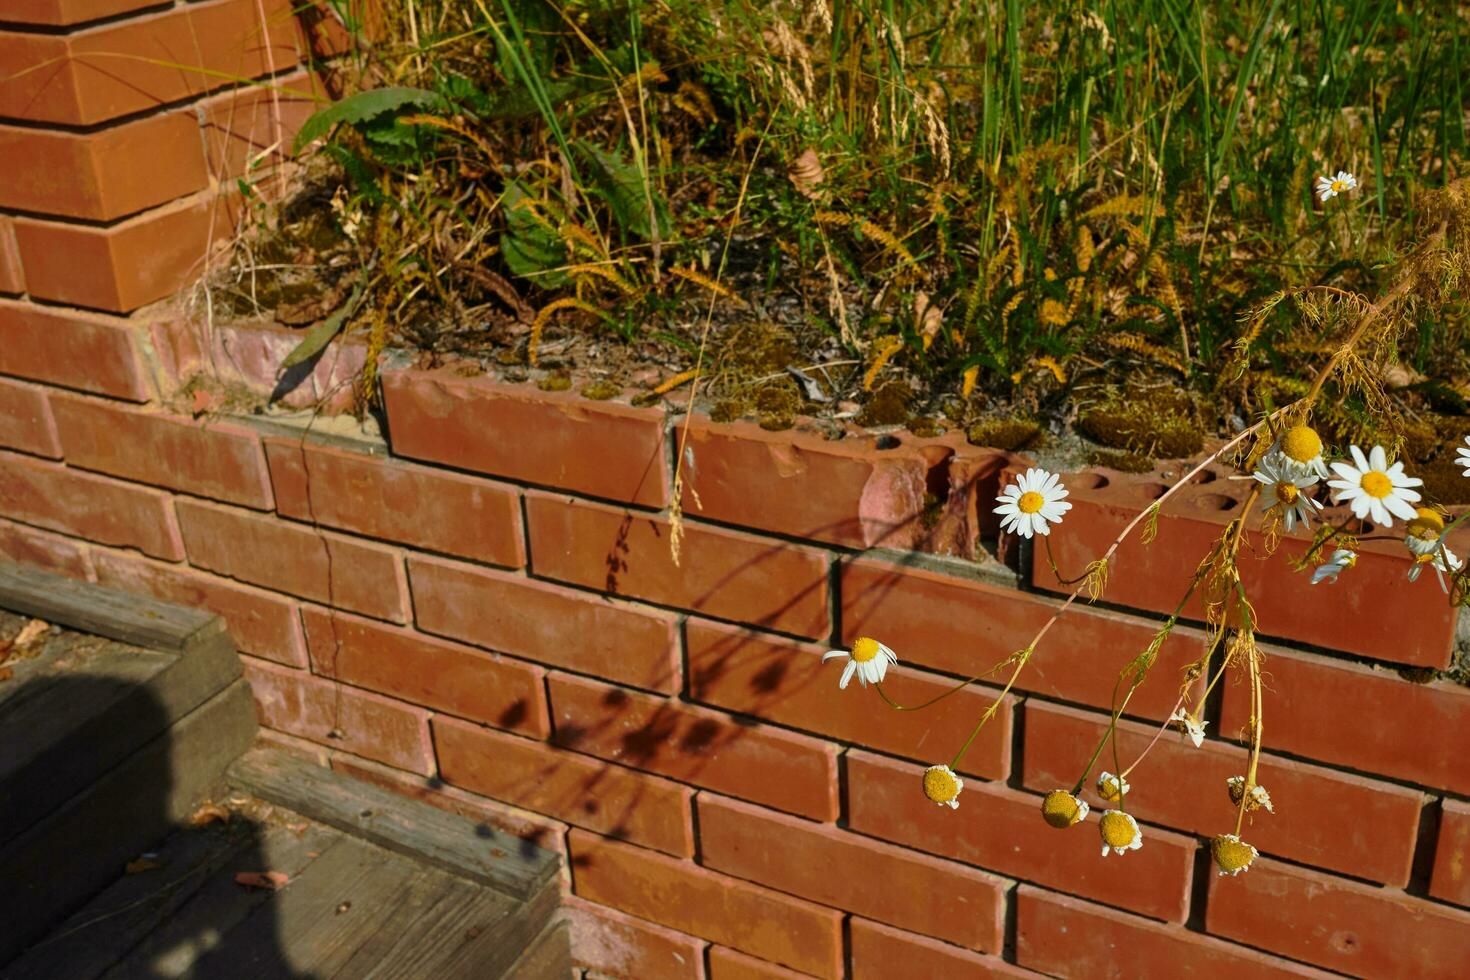 Bricks used in a retaining wall